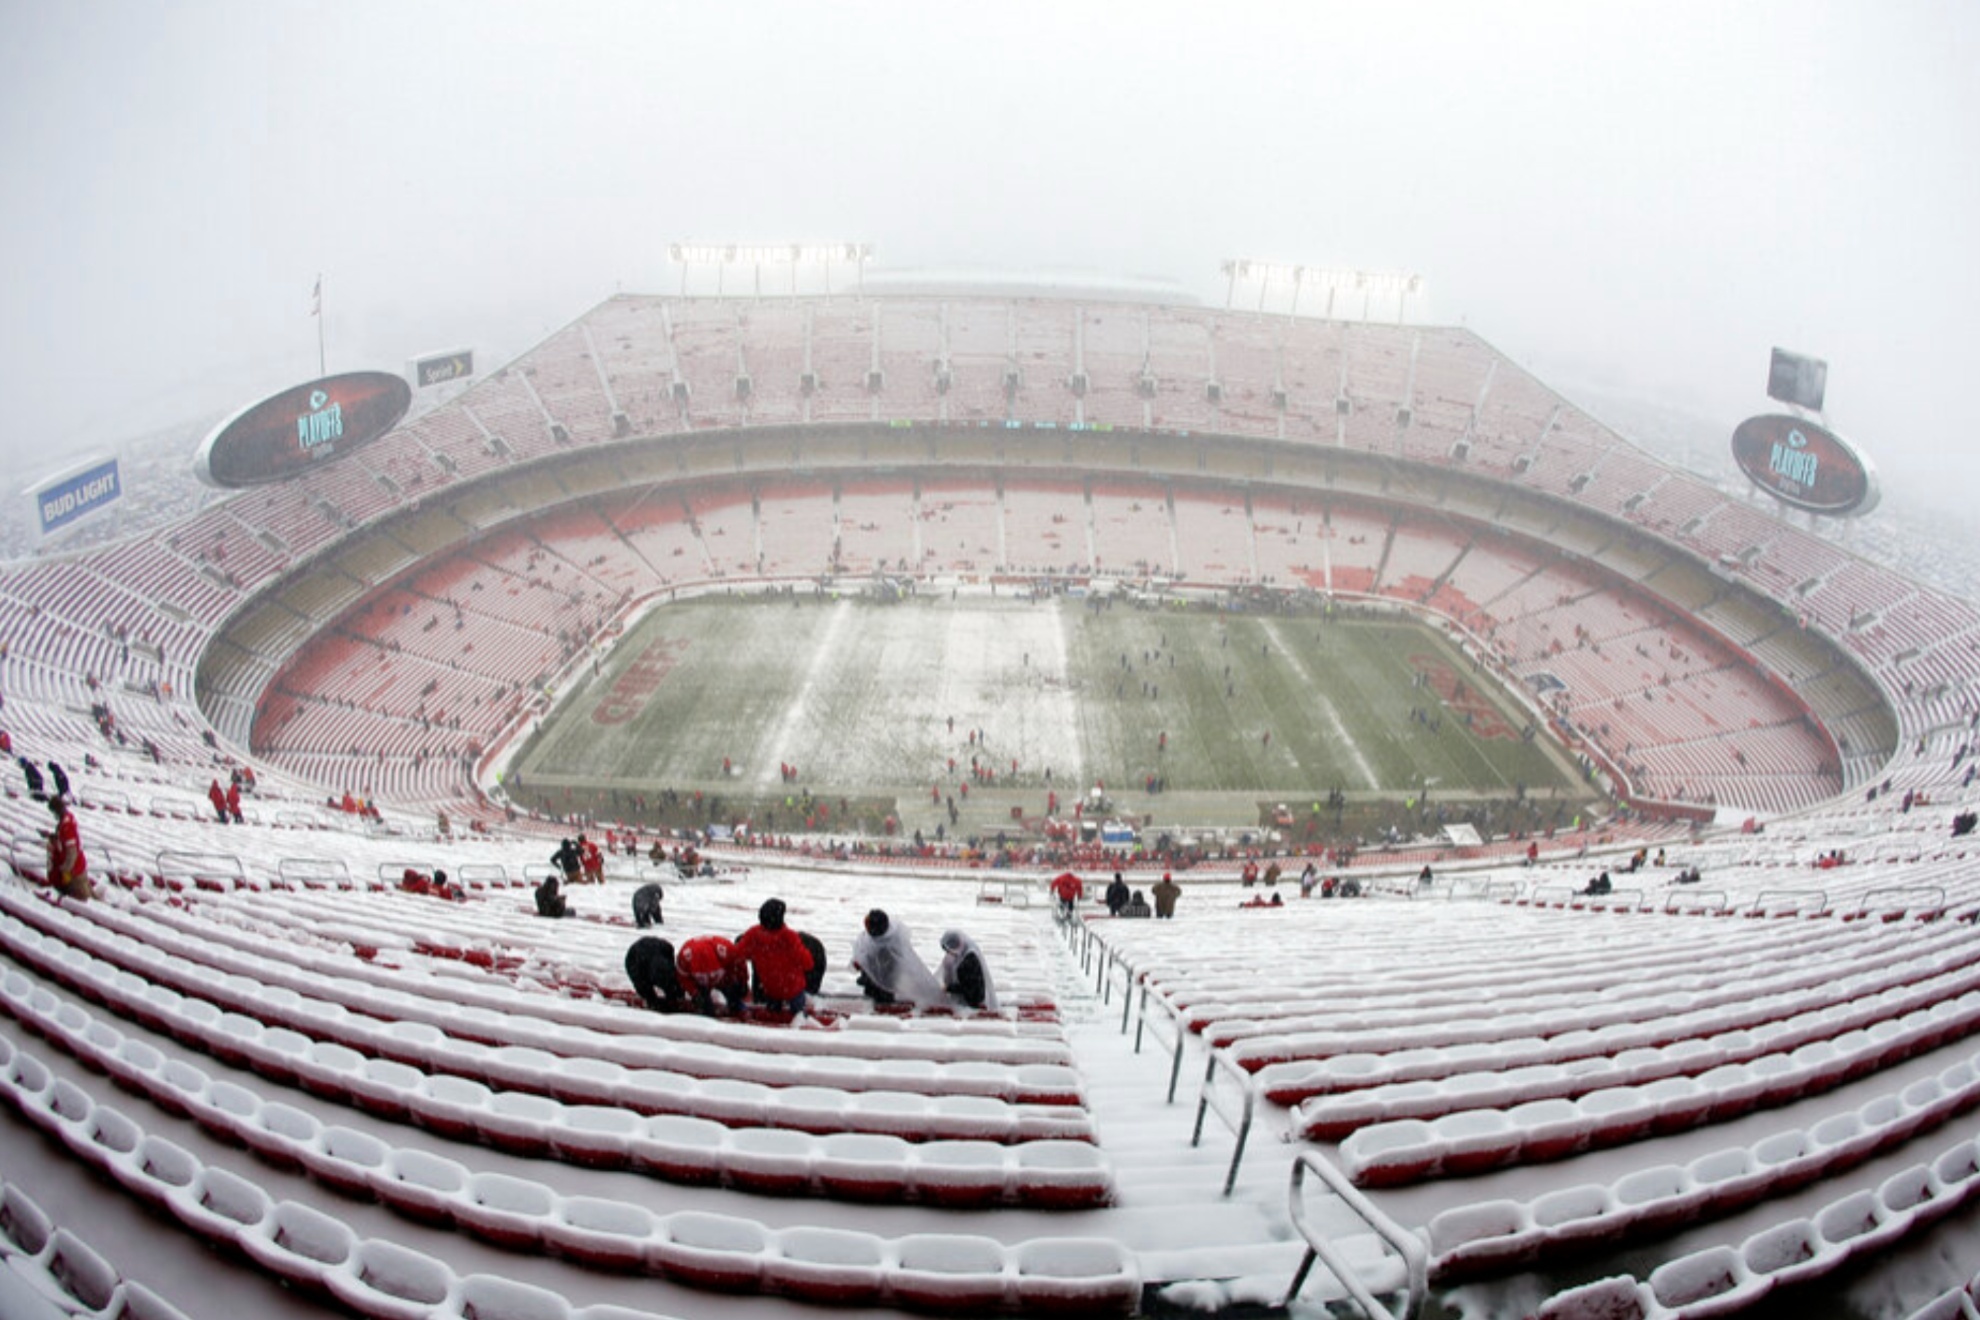 Freezing temperatures are expected for the Dolphins vs Chiefs game next Saturday